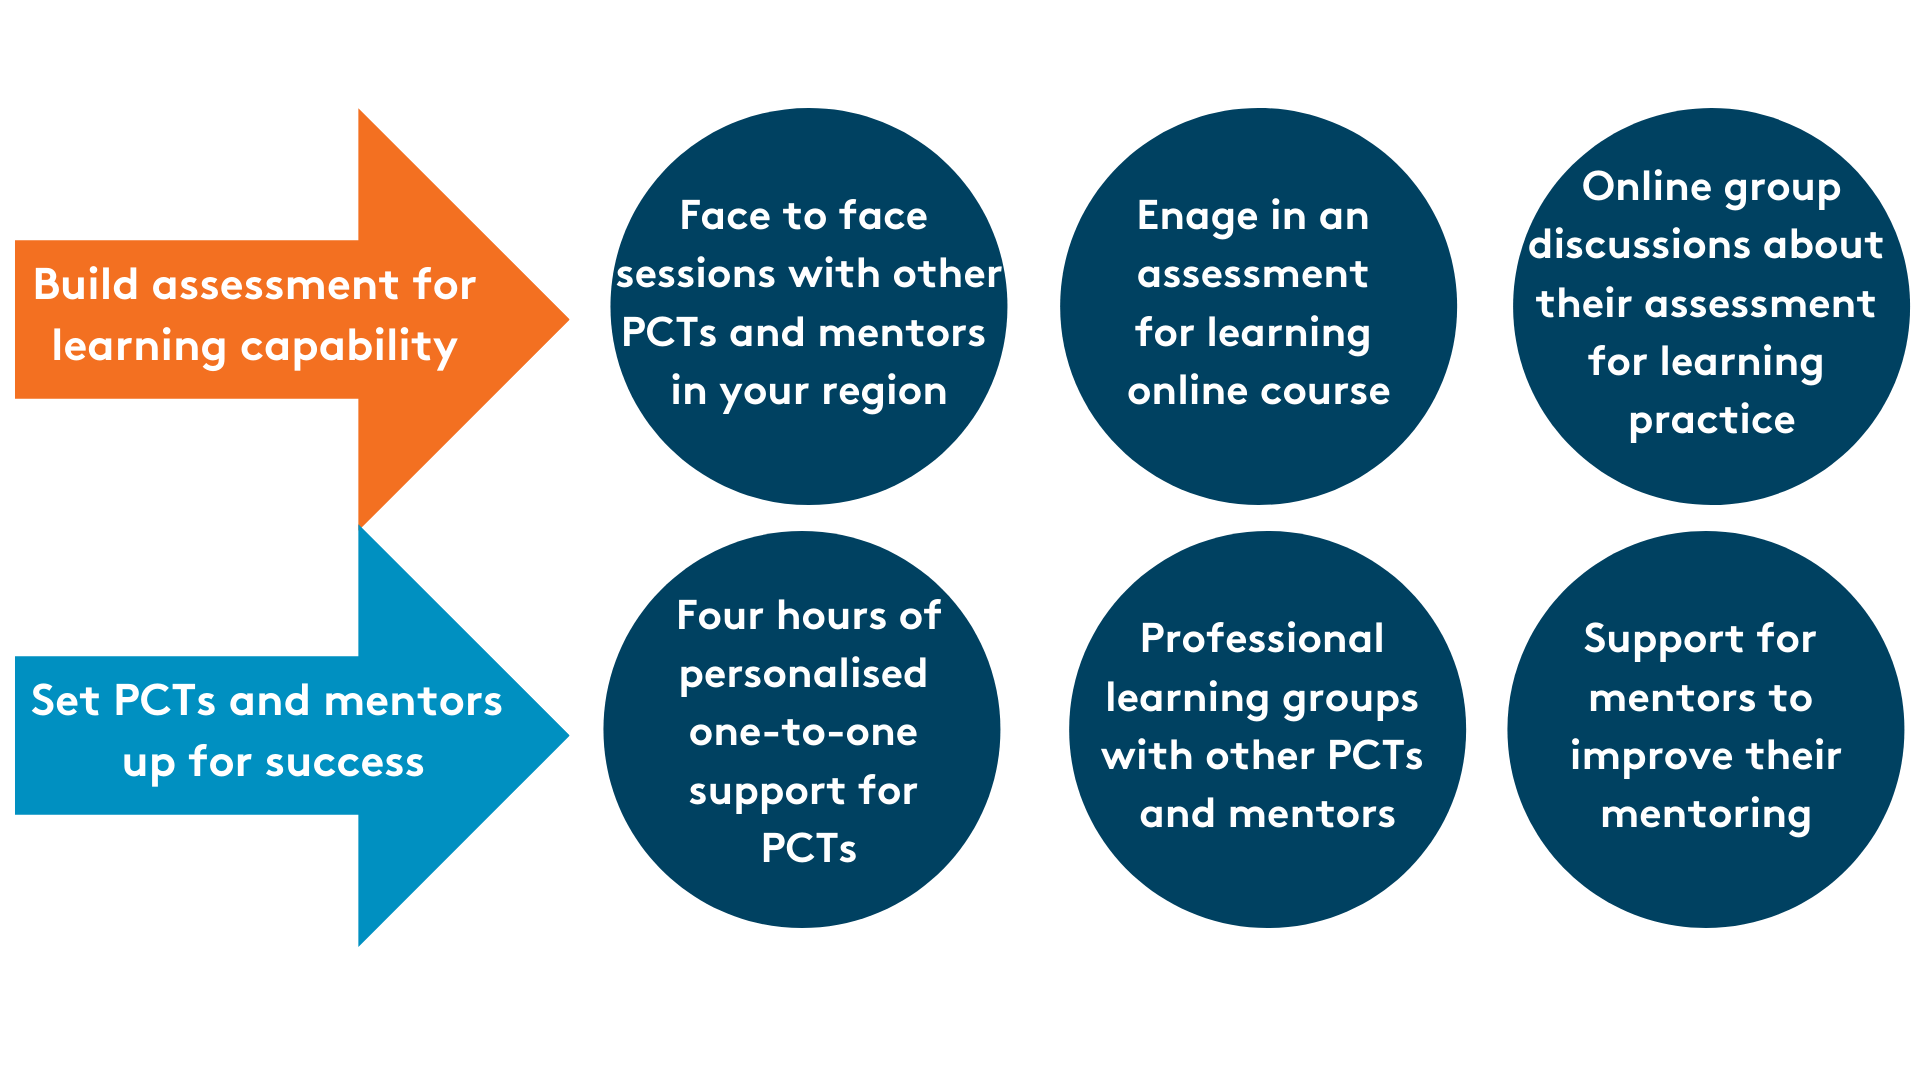 Build assessment for learning capability - face to face sessions with other PCTs and mentors, engage in AfL online course, online group discussions. Set PCTs and mentors up for success - personalised support, PLGs with other PCTs and mentors, support to improve mentoring.